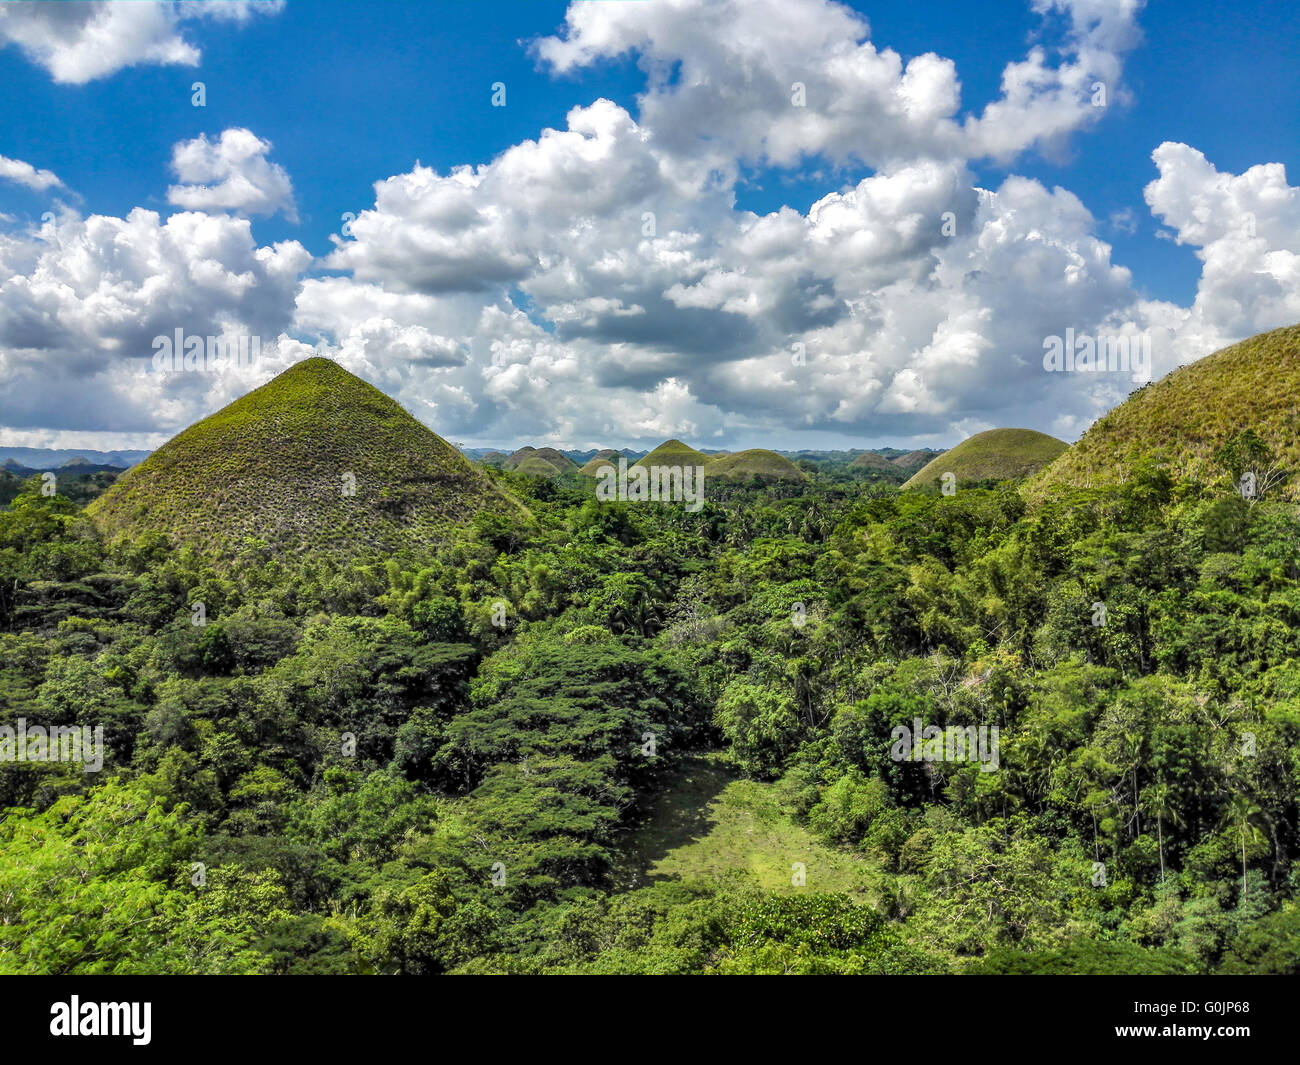 Philippines Bohol The Chocolate Hills, Bohol's most famous tourist attraction, and a very strange geological feature  Adrian Bak Stock Photo